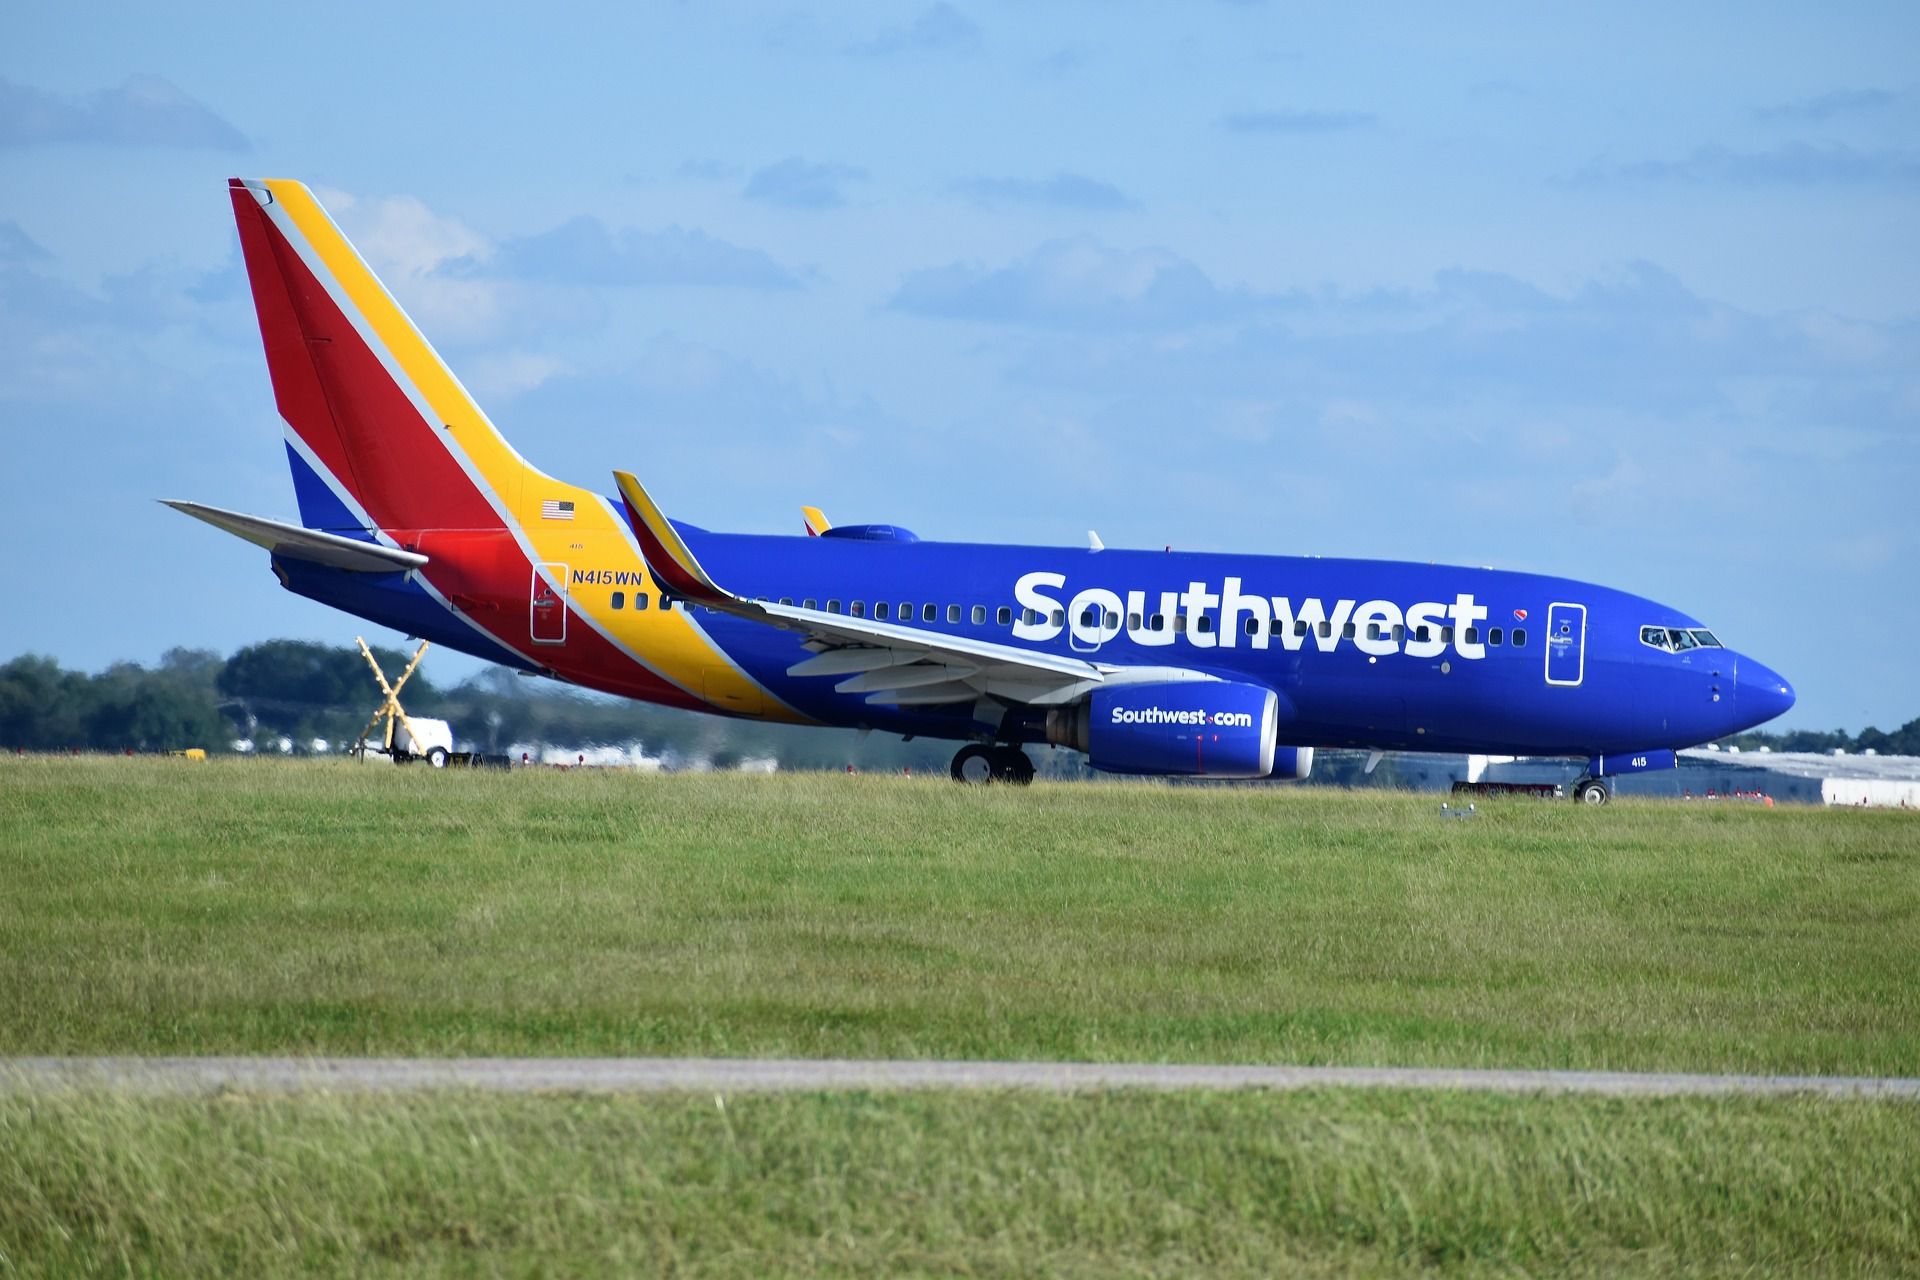 Southwest Airlines buys SAFFiRE Renewables LLC as part of its subsidiary, Southwest Airlines Renewal Ventures to develop sustainable air fuel